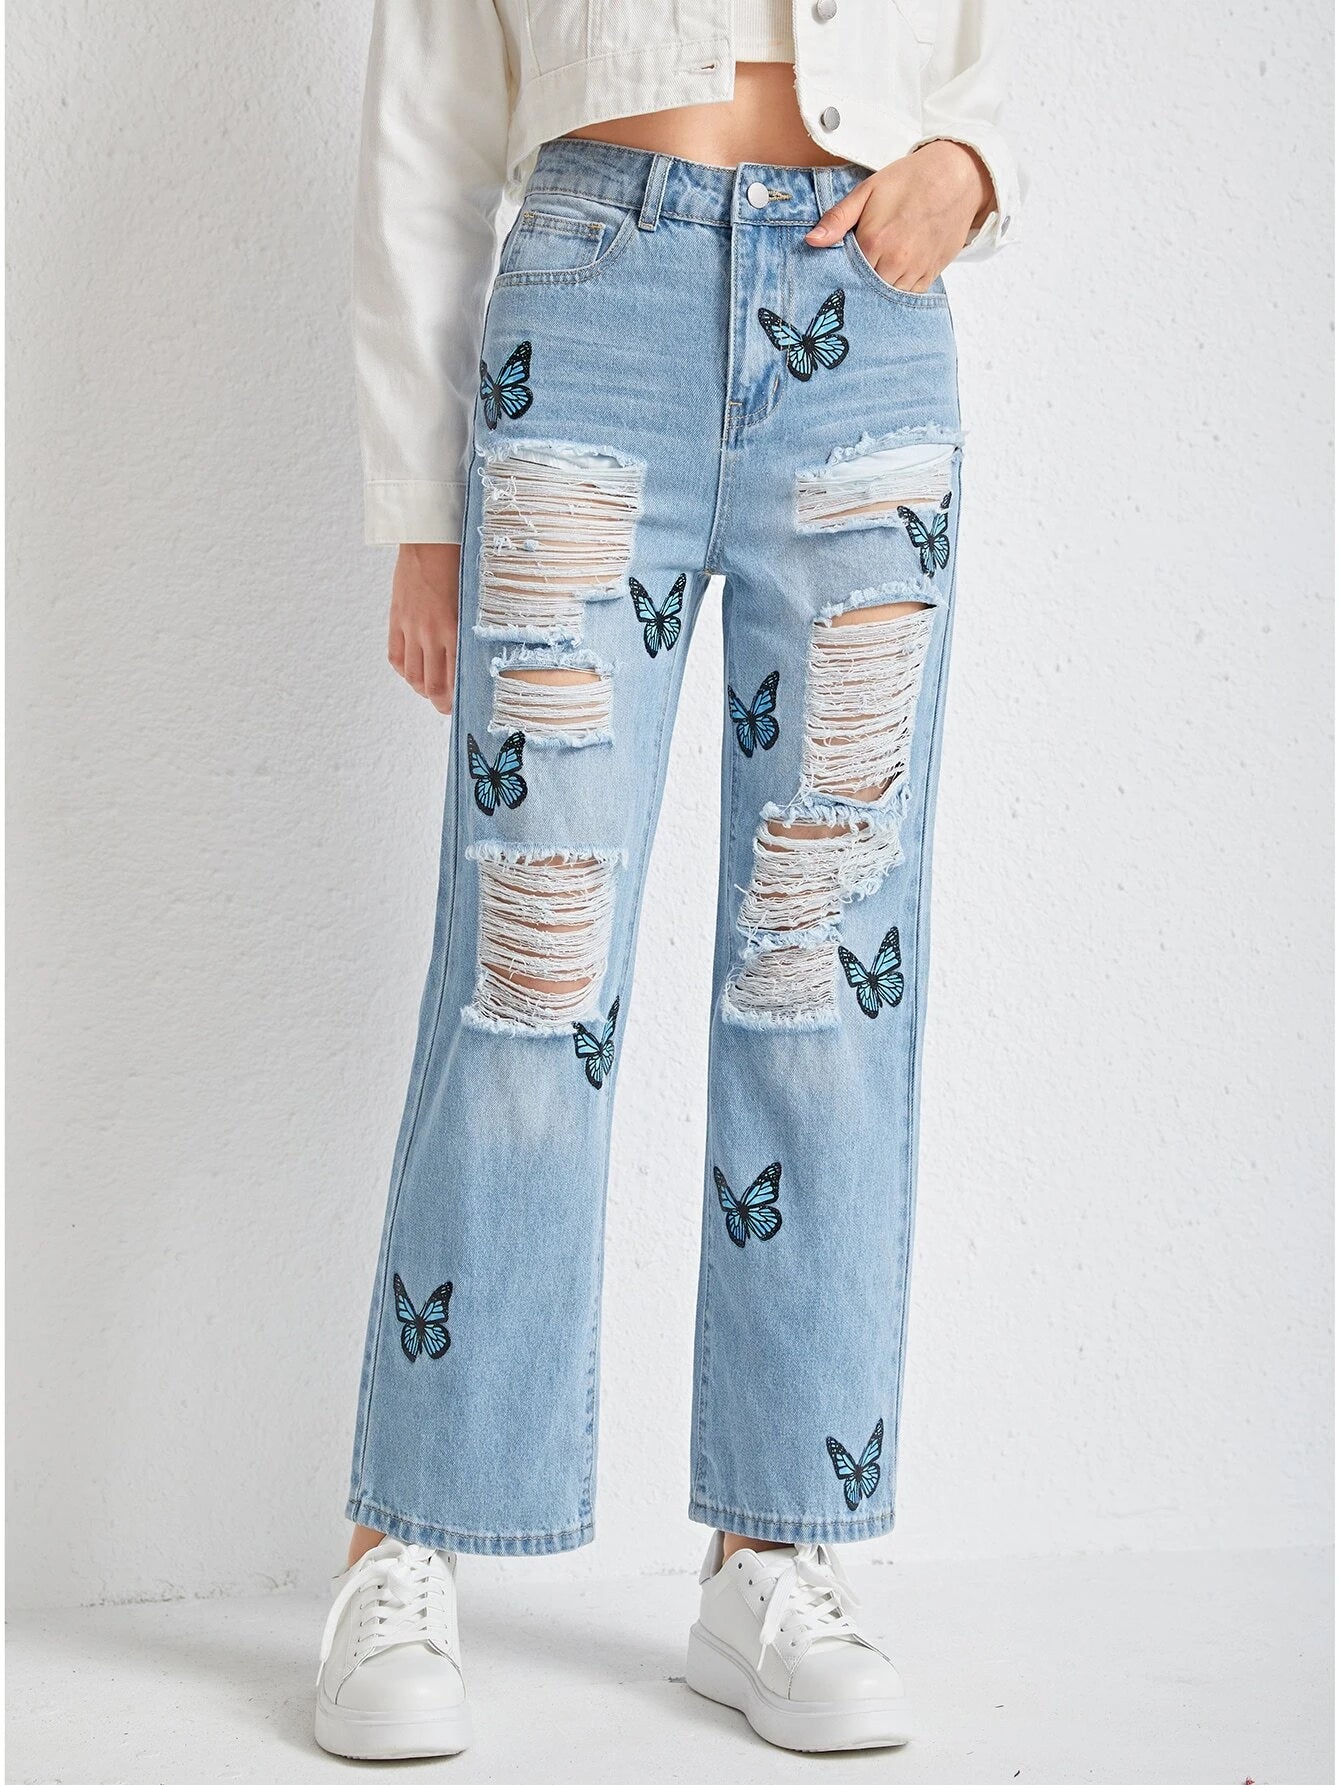 Teen Girls Butterfly Print Ripped Jeans